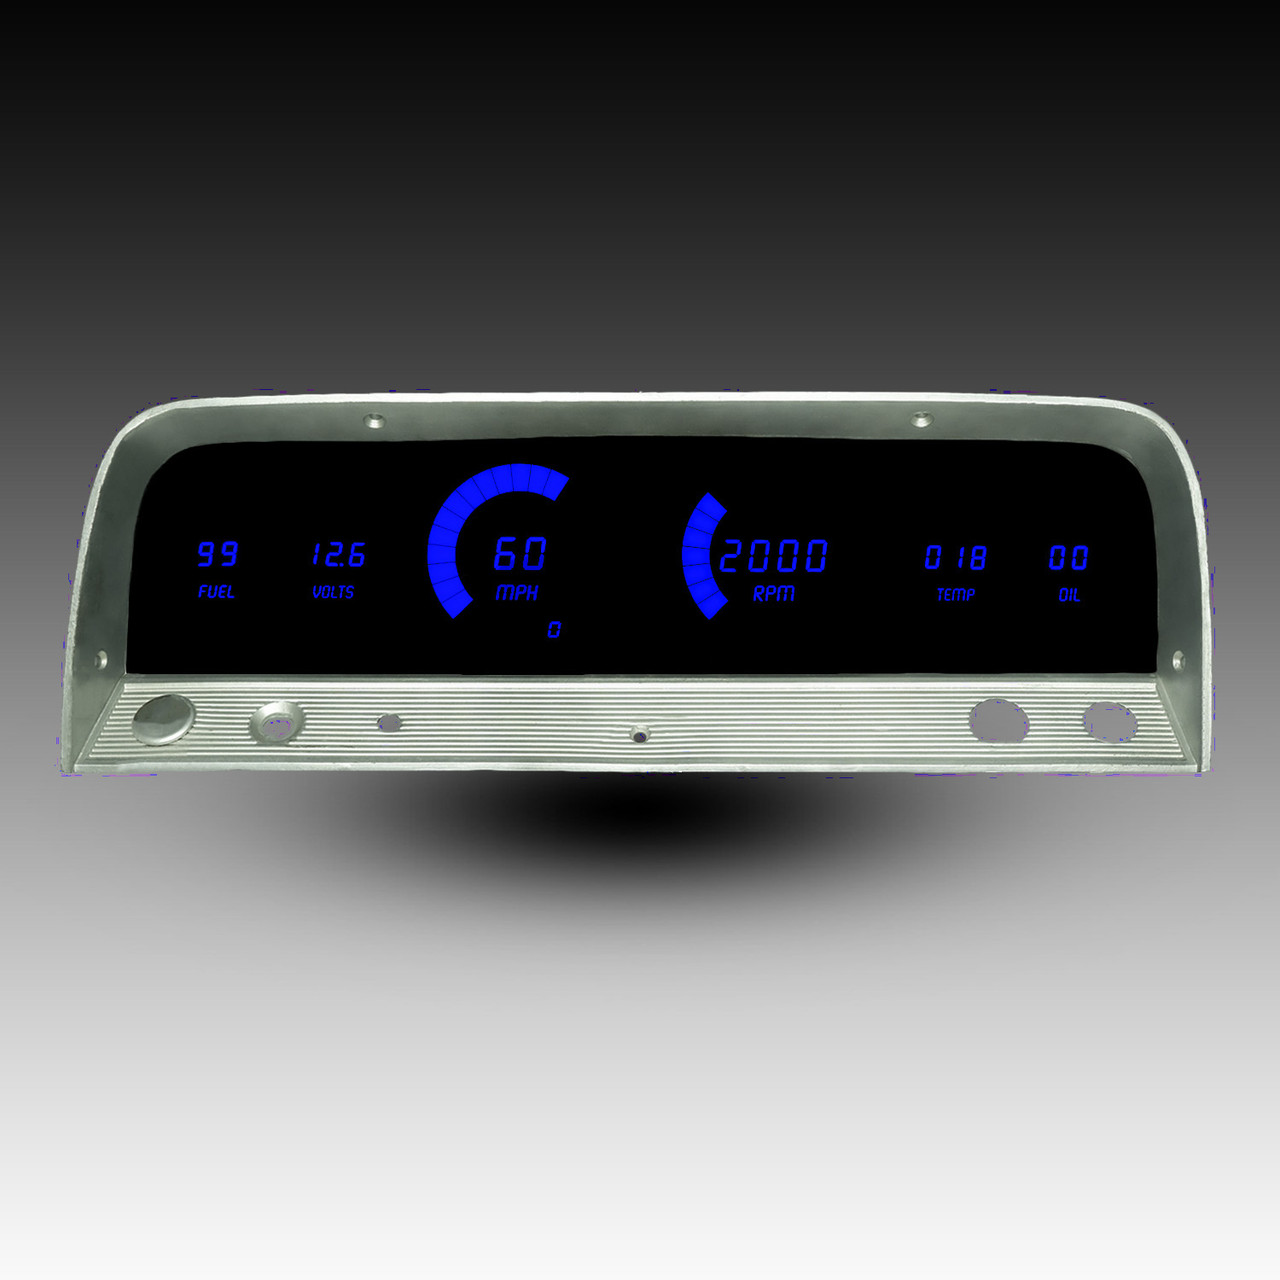 1964-661964-66 Chevy Truck LED Digital Gauge Panel - DP6002 Chevy Truck LED Digital Gauge Panel - BLUE